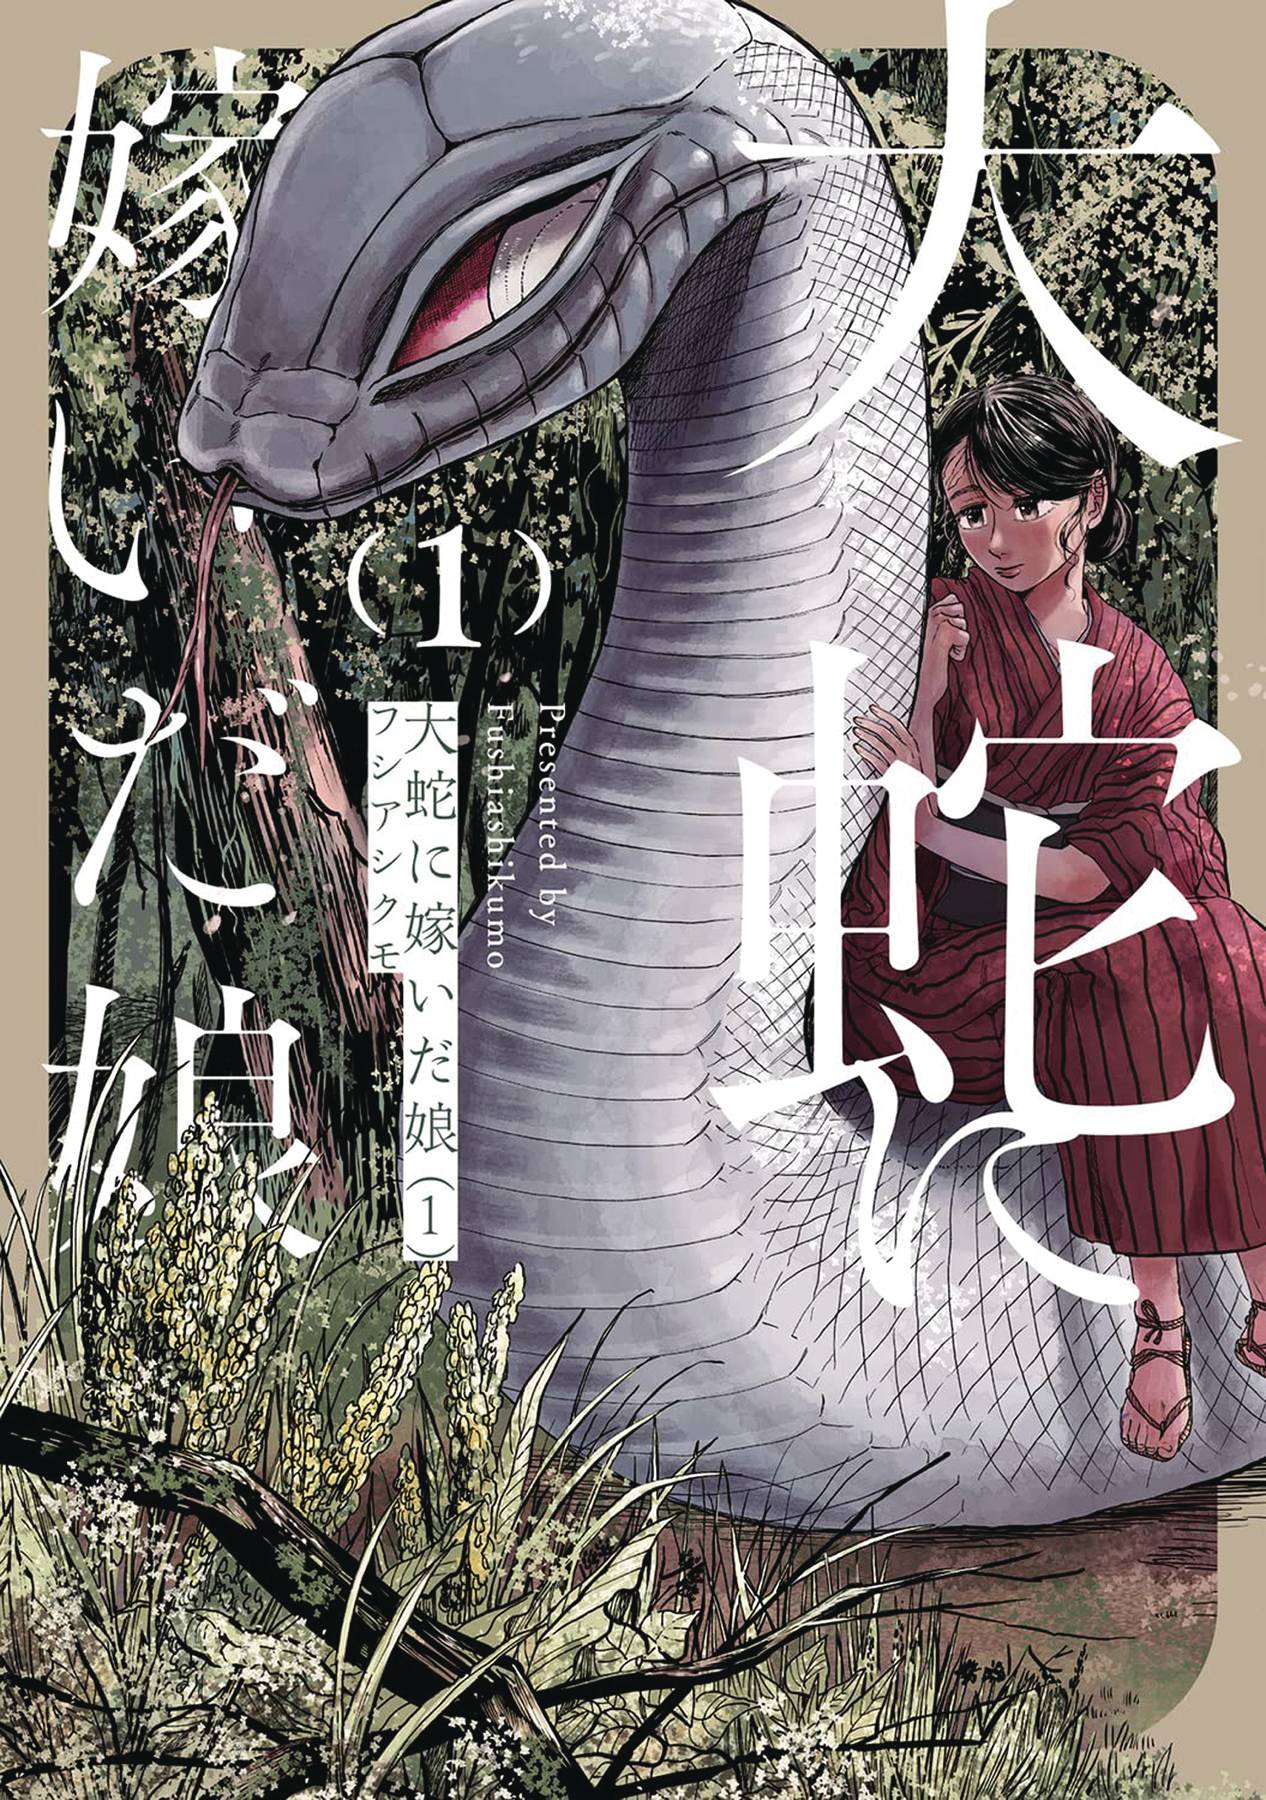 Great Snakes Bride Gn Vol 01 (C: 0-1-1) (7/19/2023)